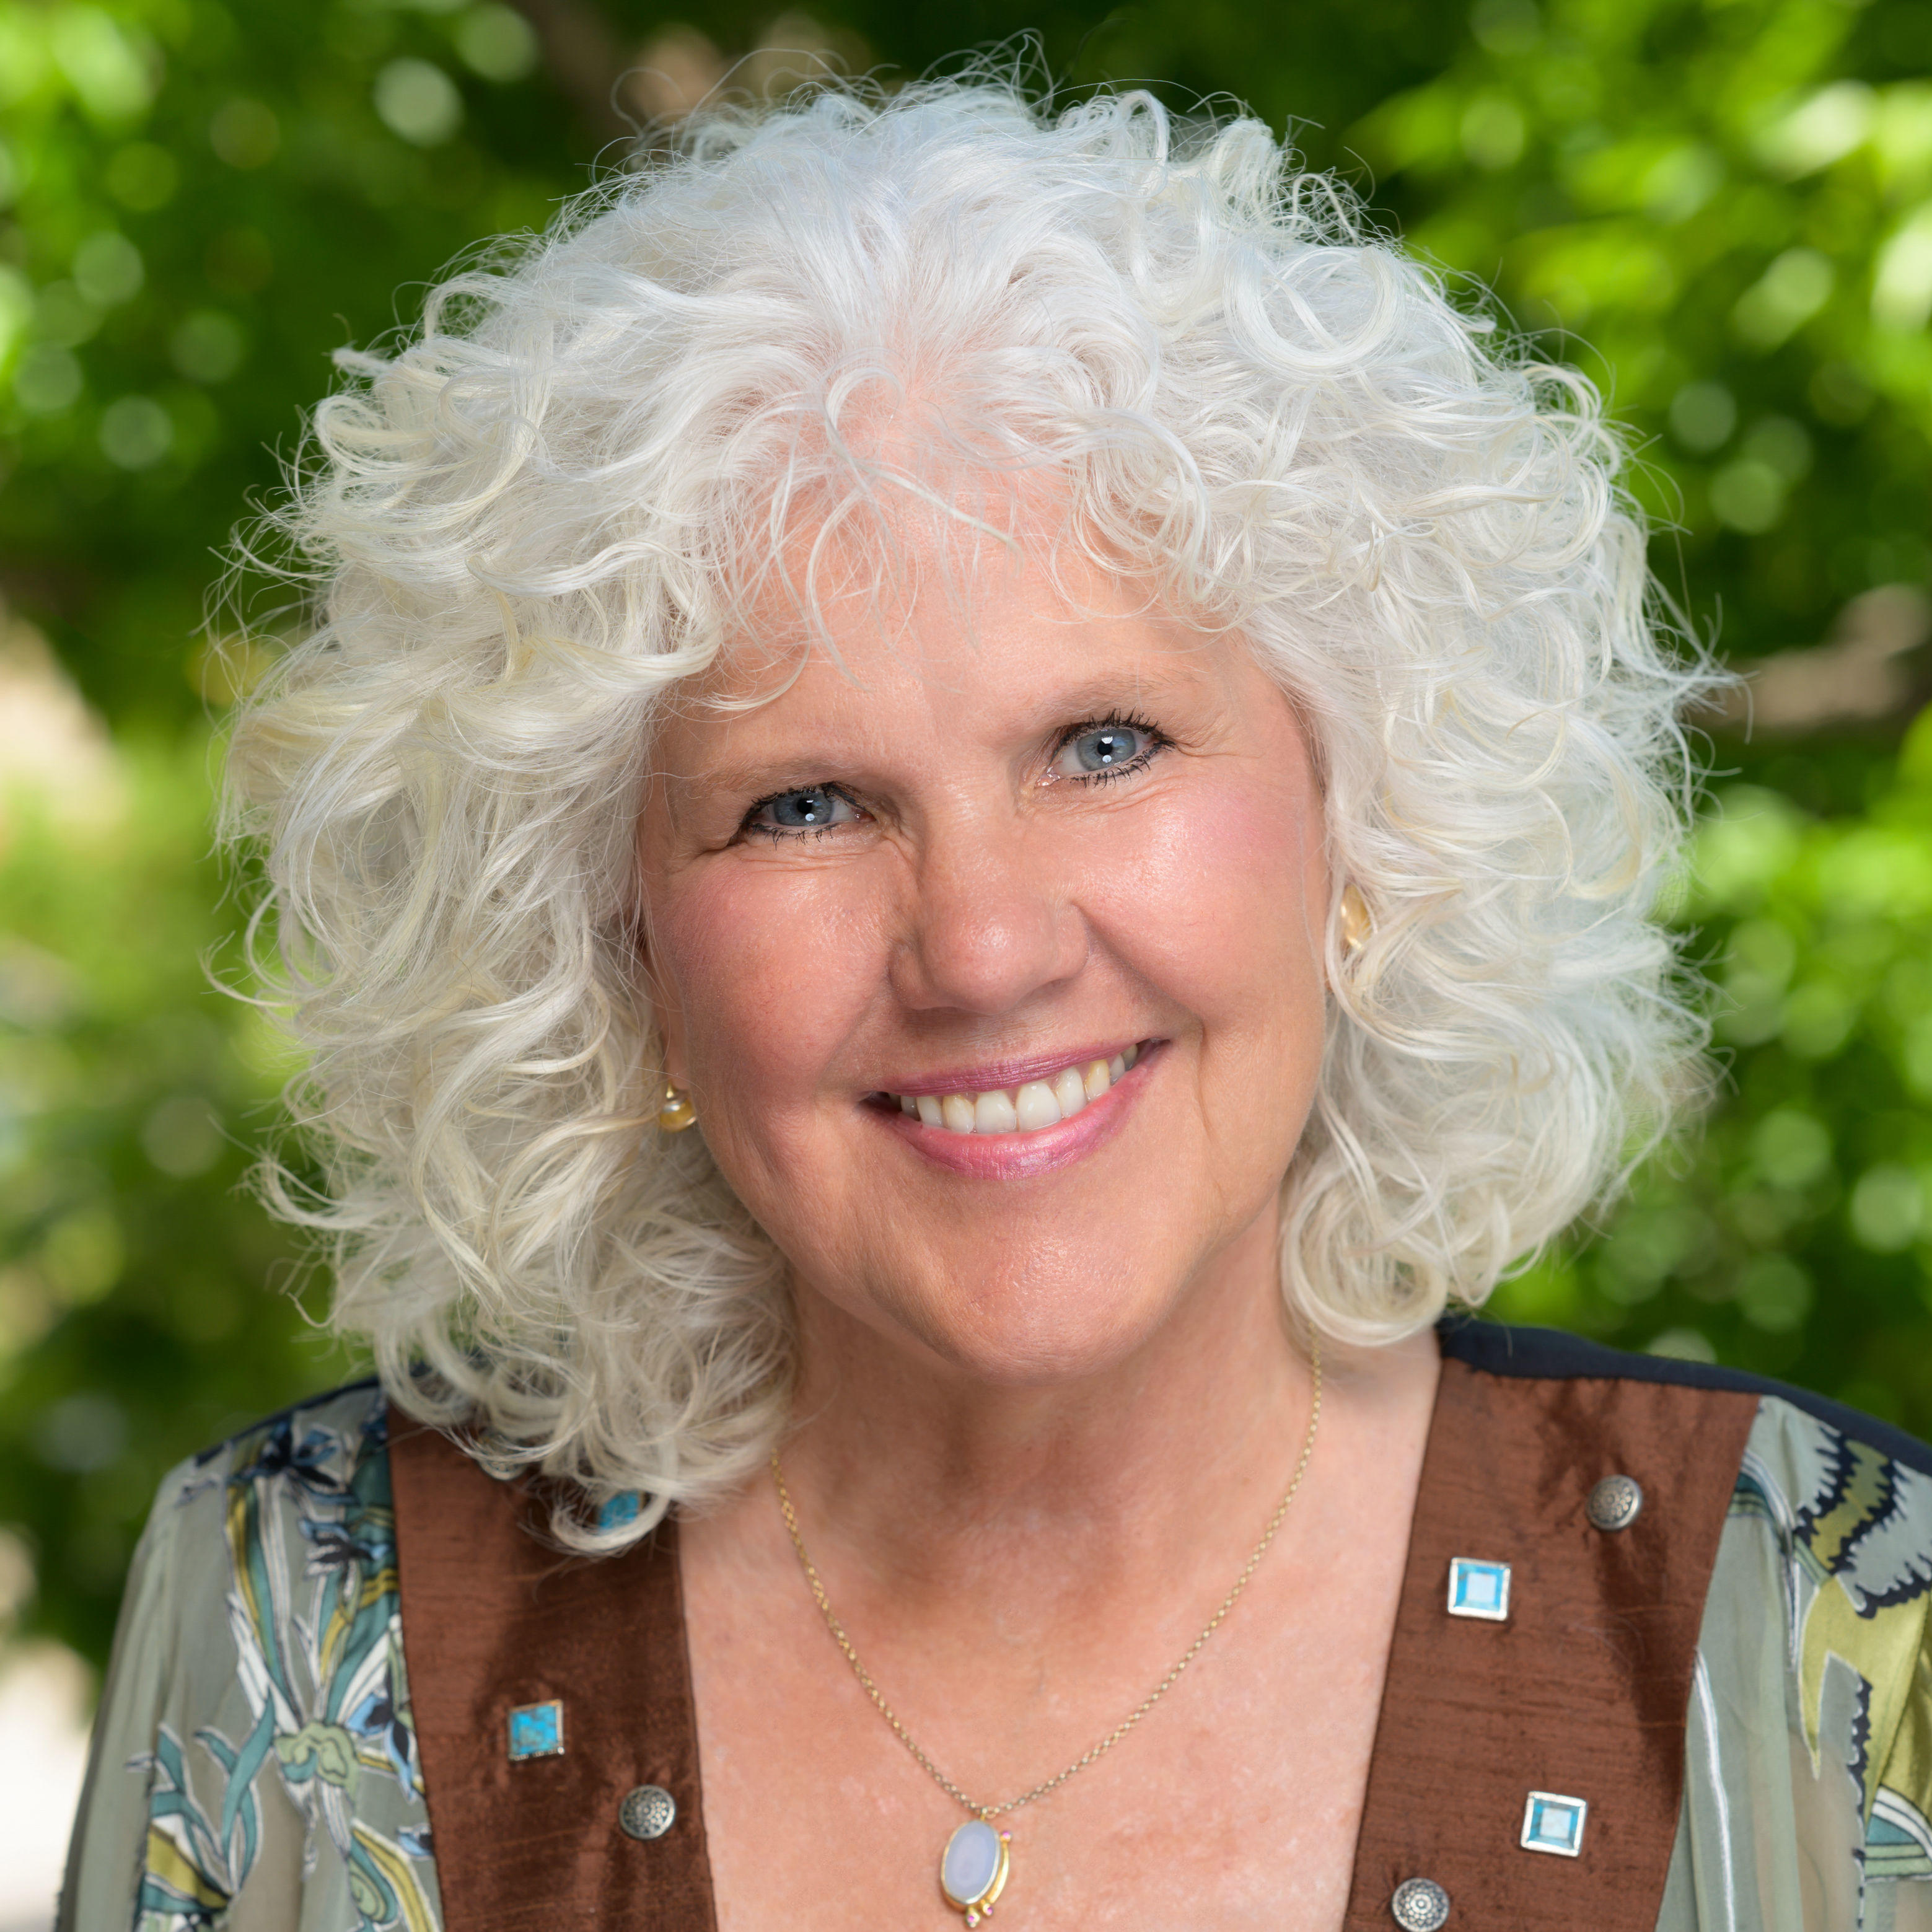 Jamie is looking at the camera and smiling. She has short-medium white curly hair that goes above her shoulders. She has a a a blue oval necklace, a blouse with floral  patterns, the patterns include two brown strip with blue squares, and a black floral shirt underneath. Jamie has blue eyes and in standing in front of a green nature background. 